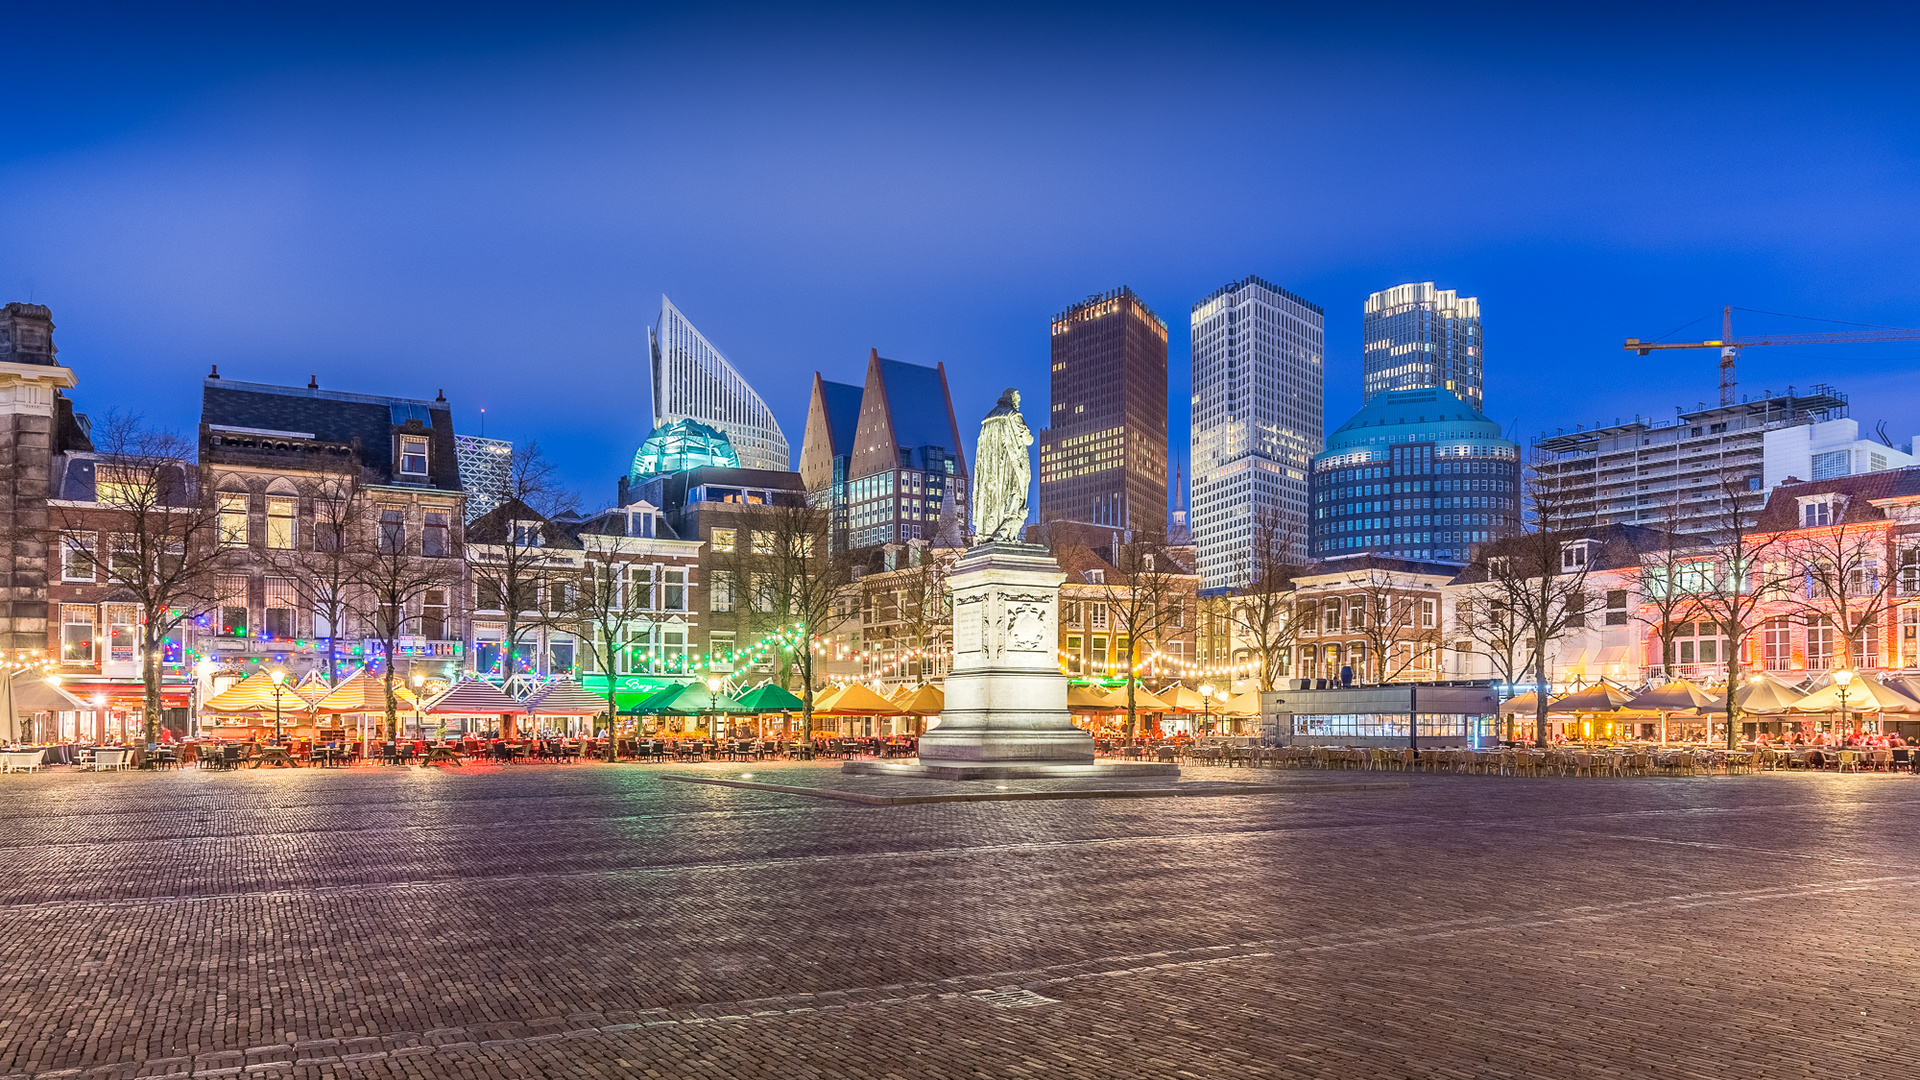 Download Wallpaper Night Square in The Hague, Netherlands (1920x1080). The Wallpaper, photo